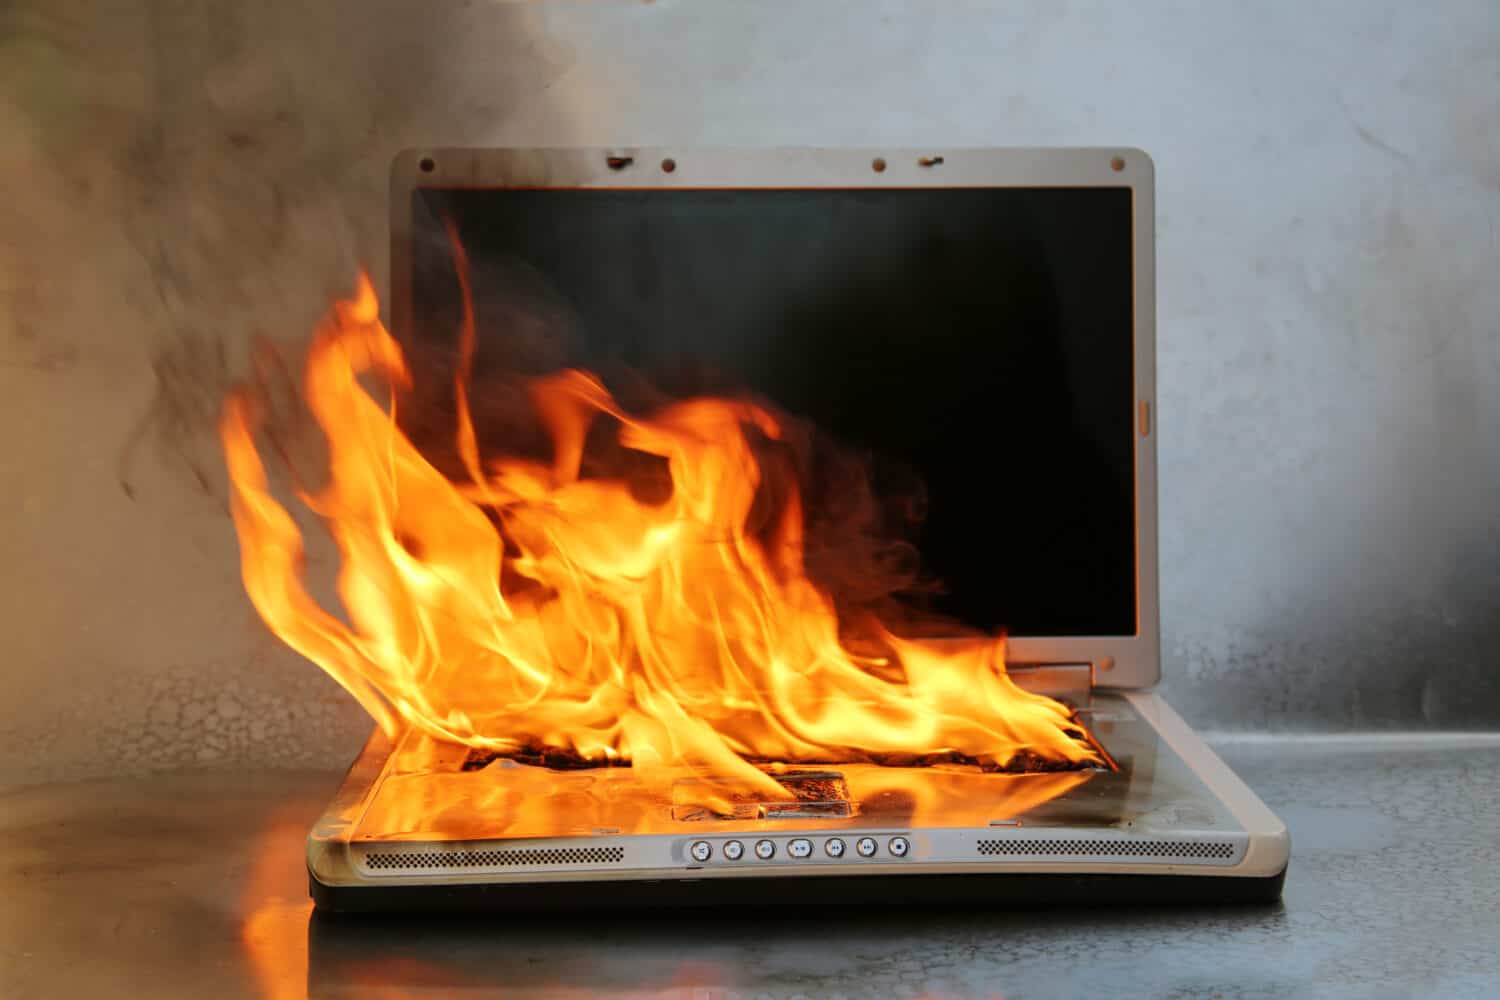 Laptop Damage. Laptop on fire and flames. Computer Repair. Flaming Fire laptop computer. 